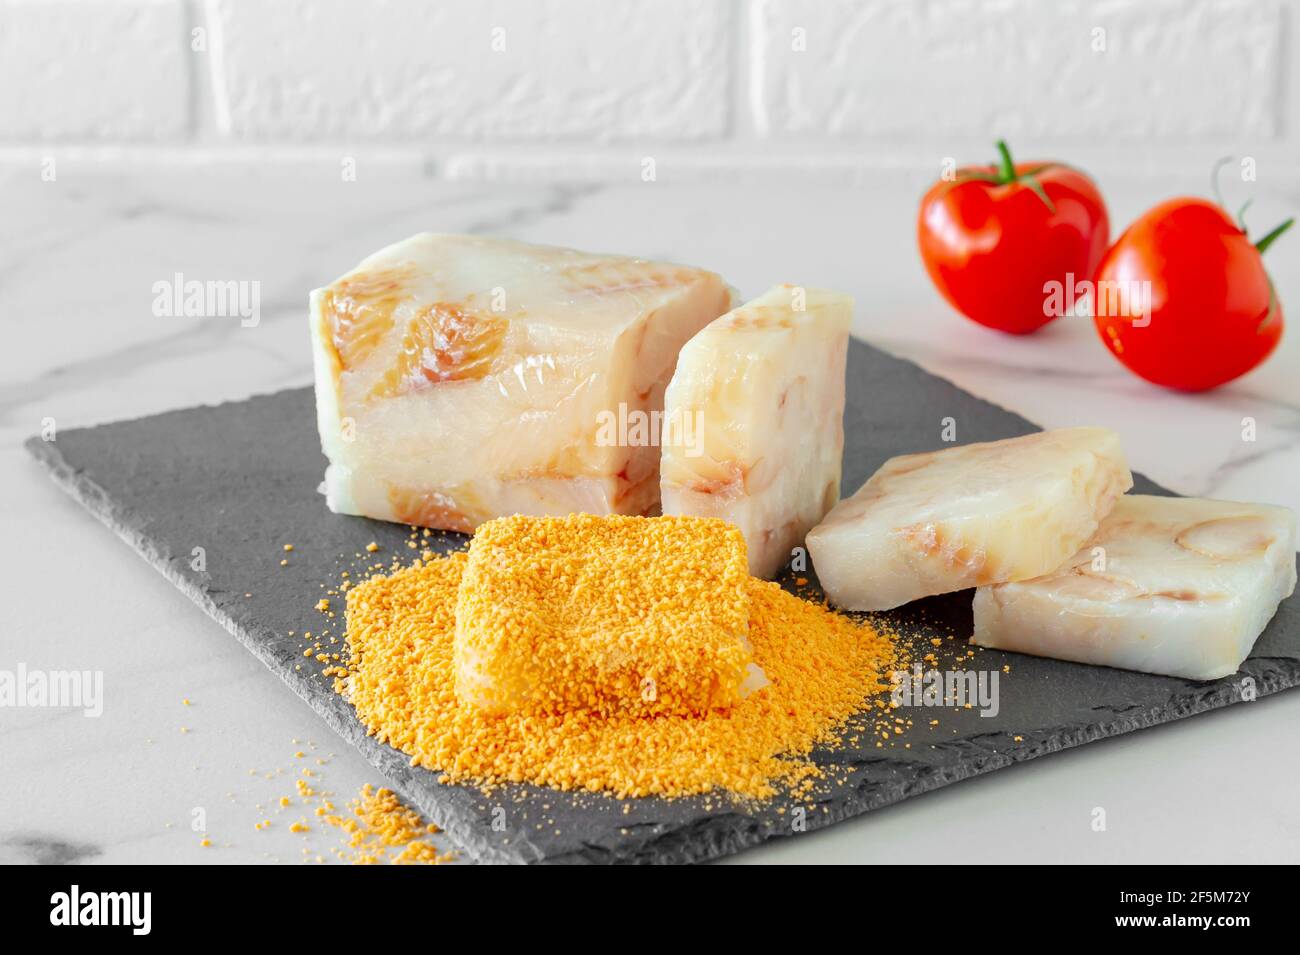 Raw fish blocked in crumbs on a stone board prepared for frying. Stock Photo